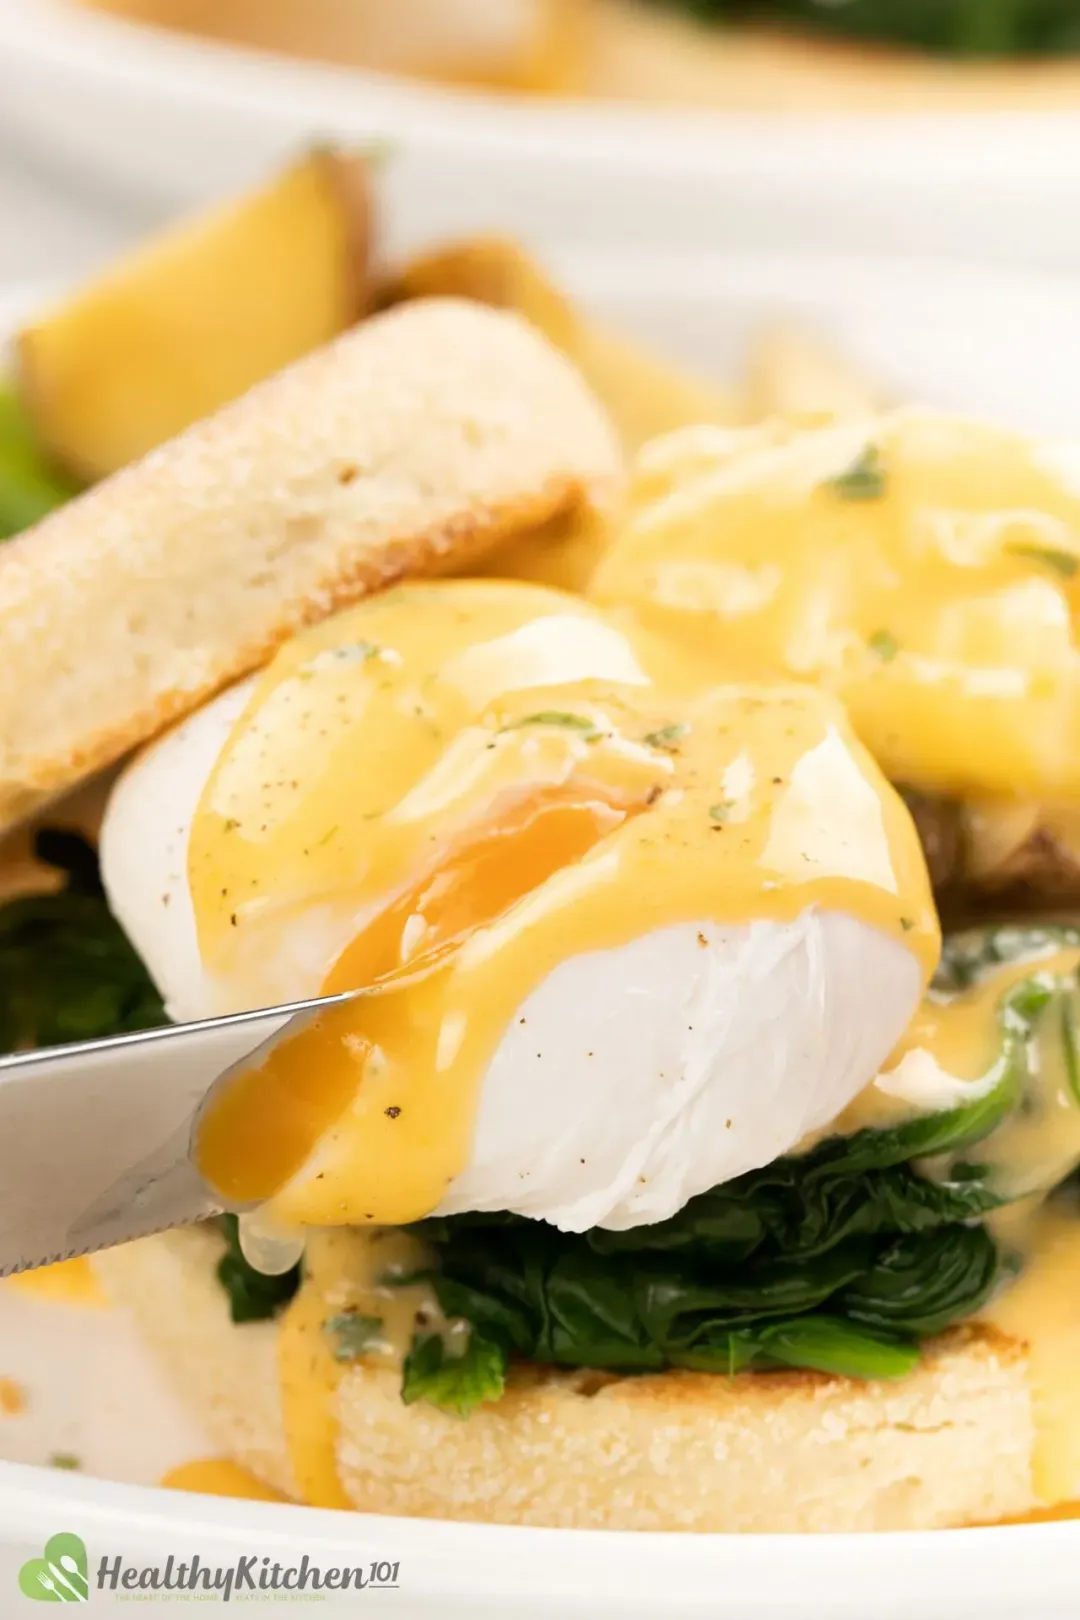 A knife slicing into a poached egg drenched in runny Hollandaise sauce over spinach and English muffin 